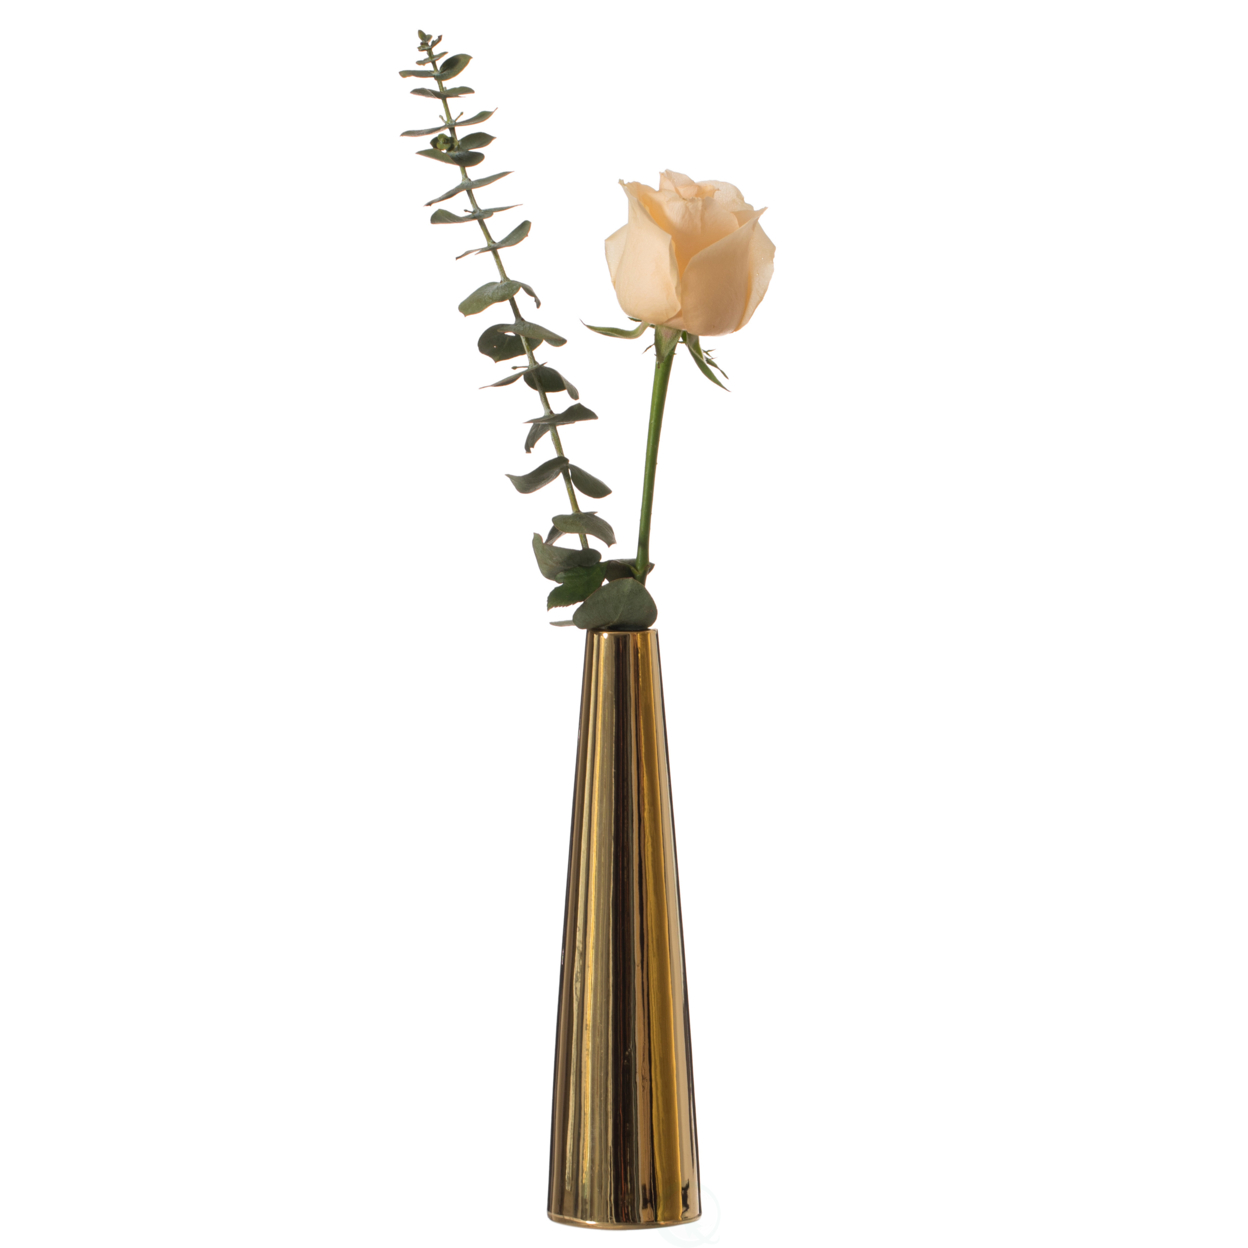 8 Inch Contemporary Ceramic Cone Shape Table Vase Modern Pastel Colored Flower Holder - Gold